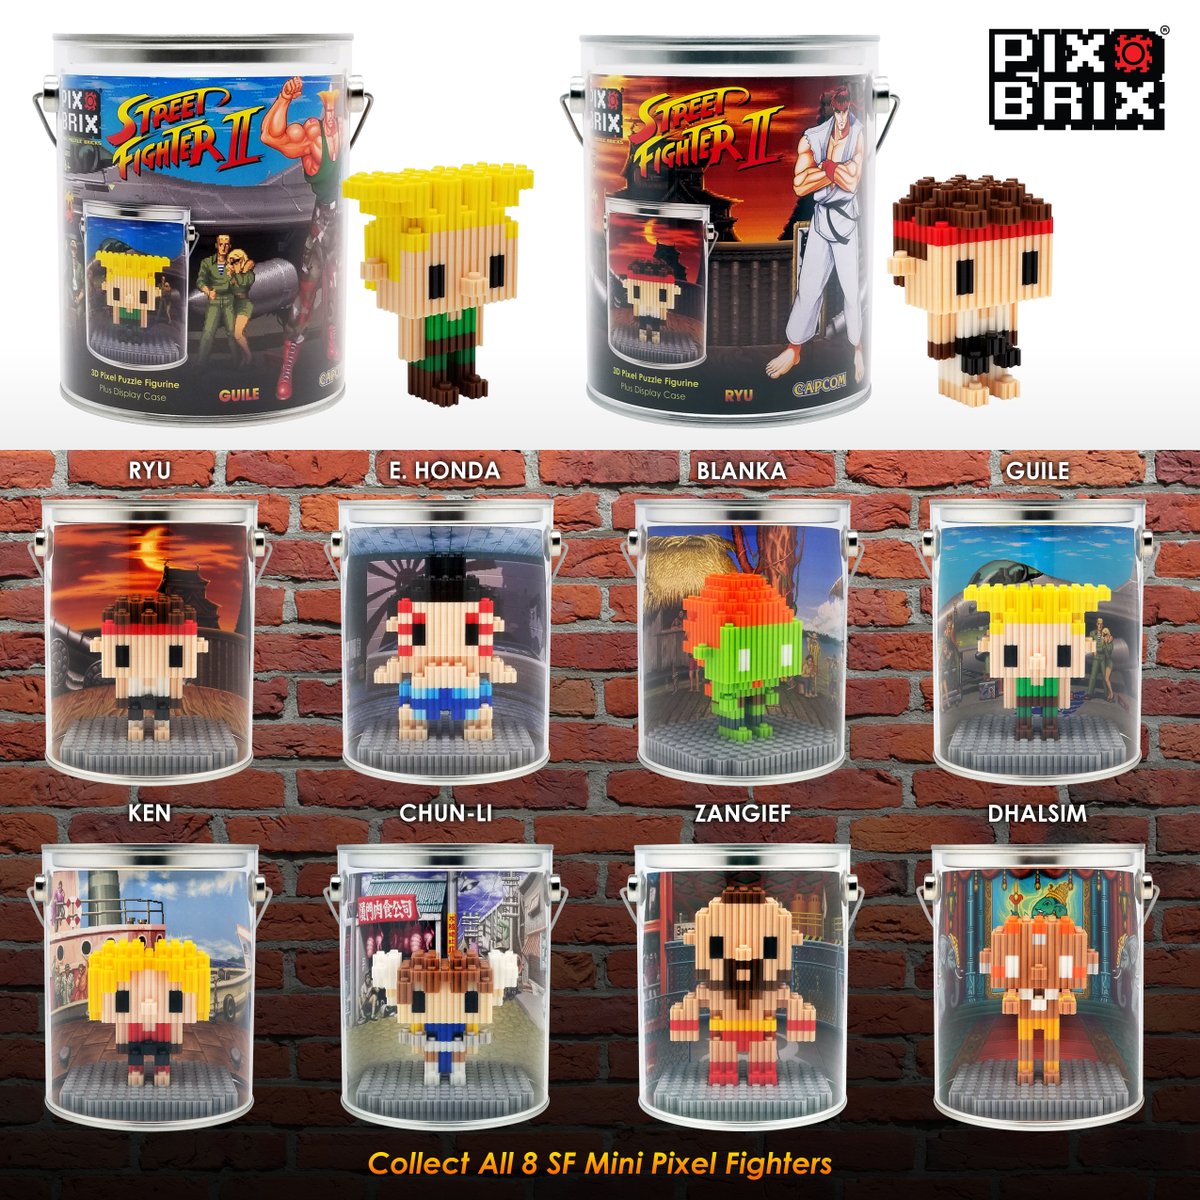 Buildable 3D Mini Pixel Fighters with a character level display case. Collect all 8 original Street Fighter® II characters. Each kit includes bonus Street Fighter® prismatic collectible trading card. 🥊 bit.ly/StreetFighterP…